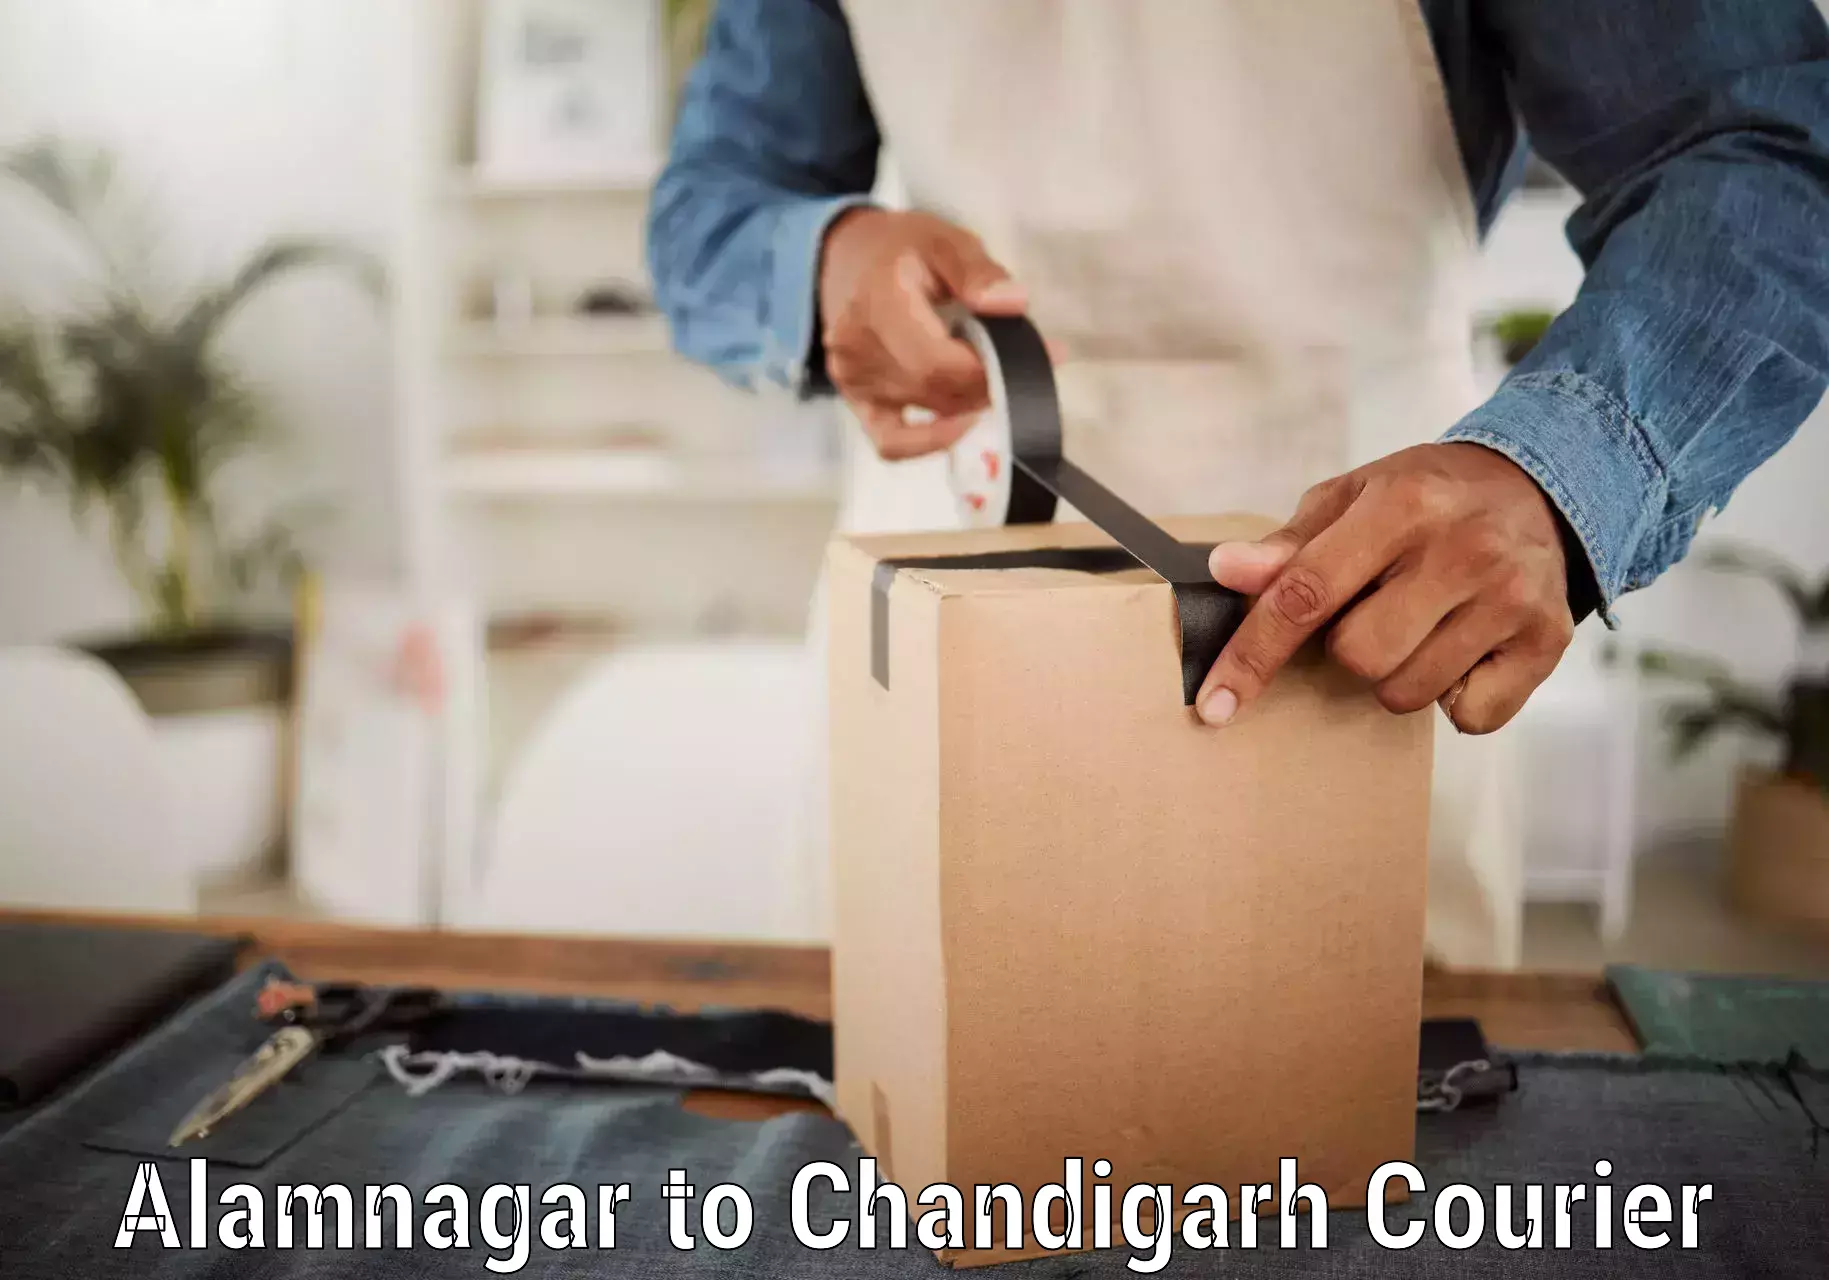 Pharmaceutical courier Alamnagar to Chandigarh